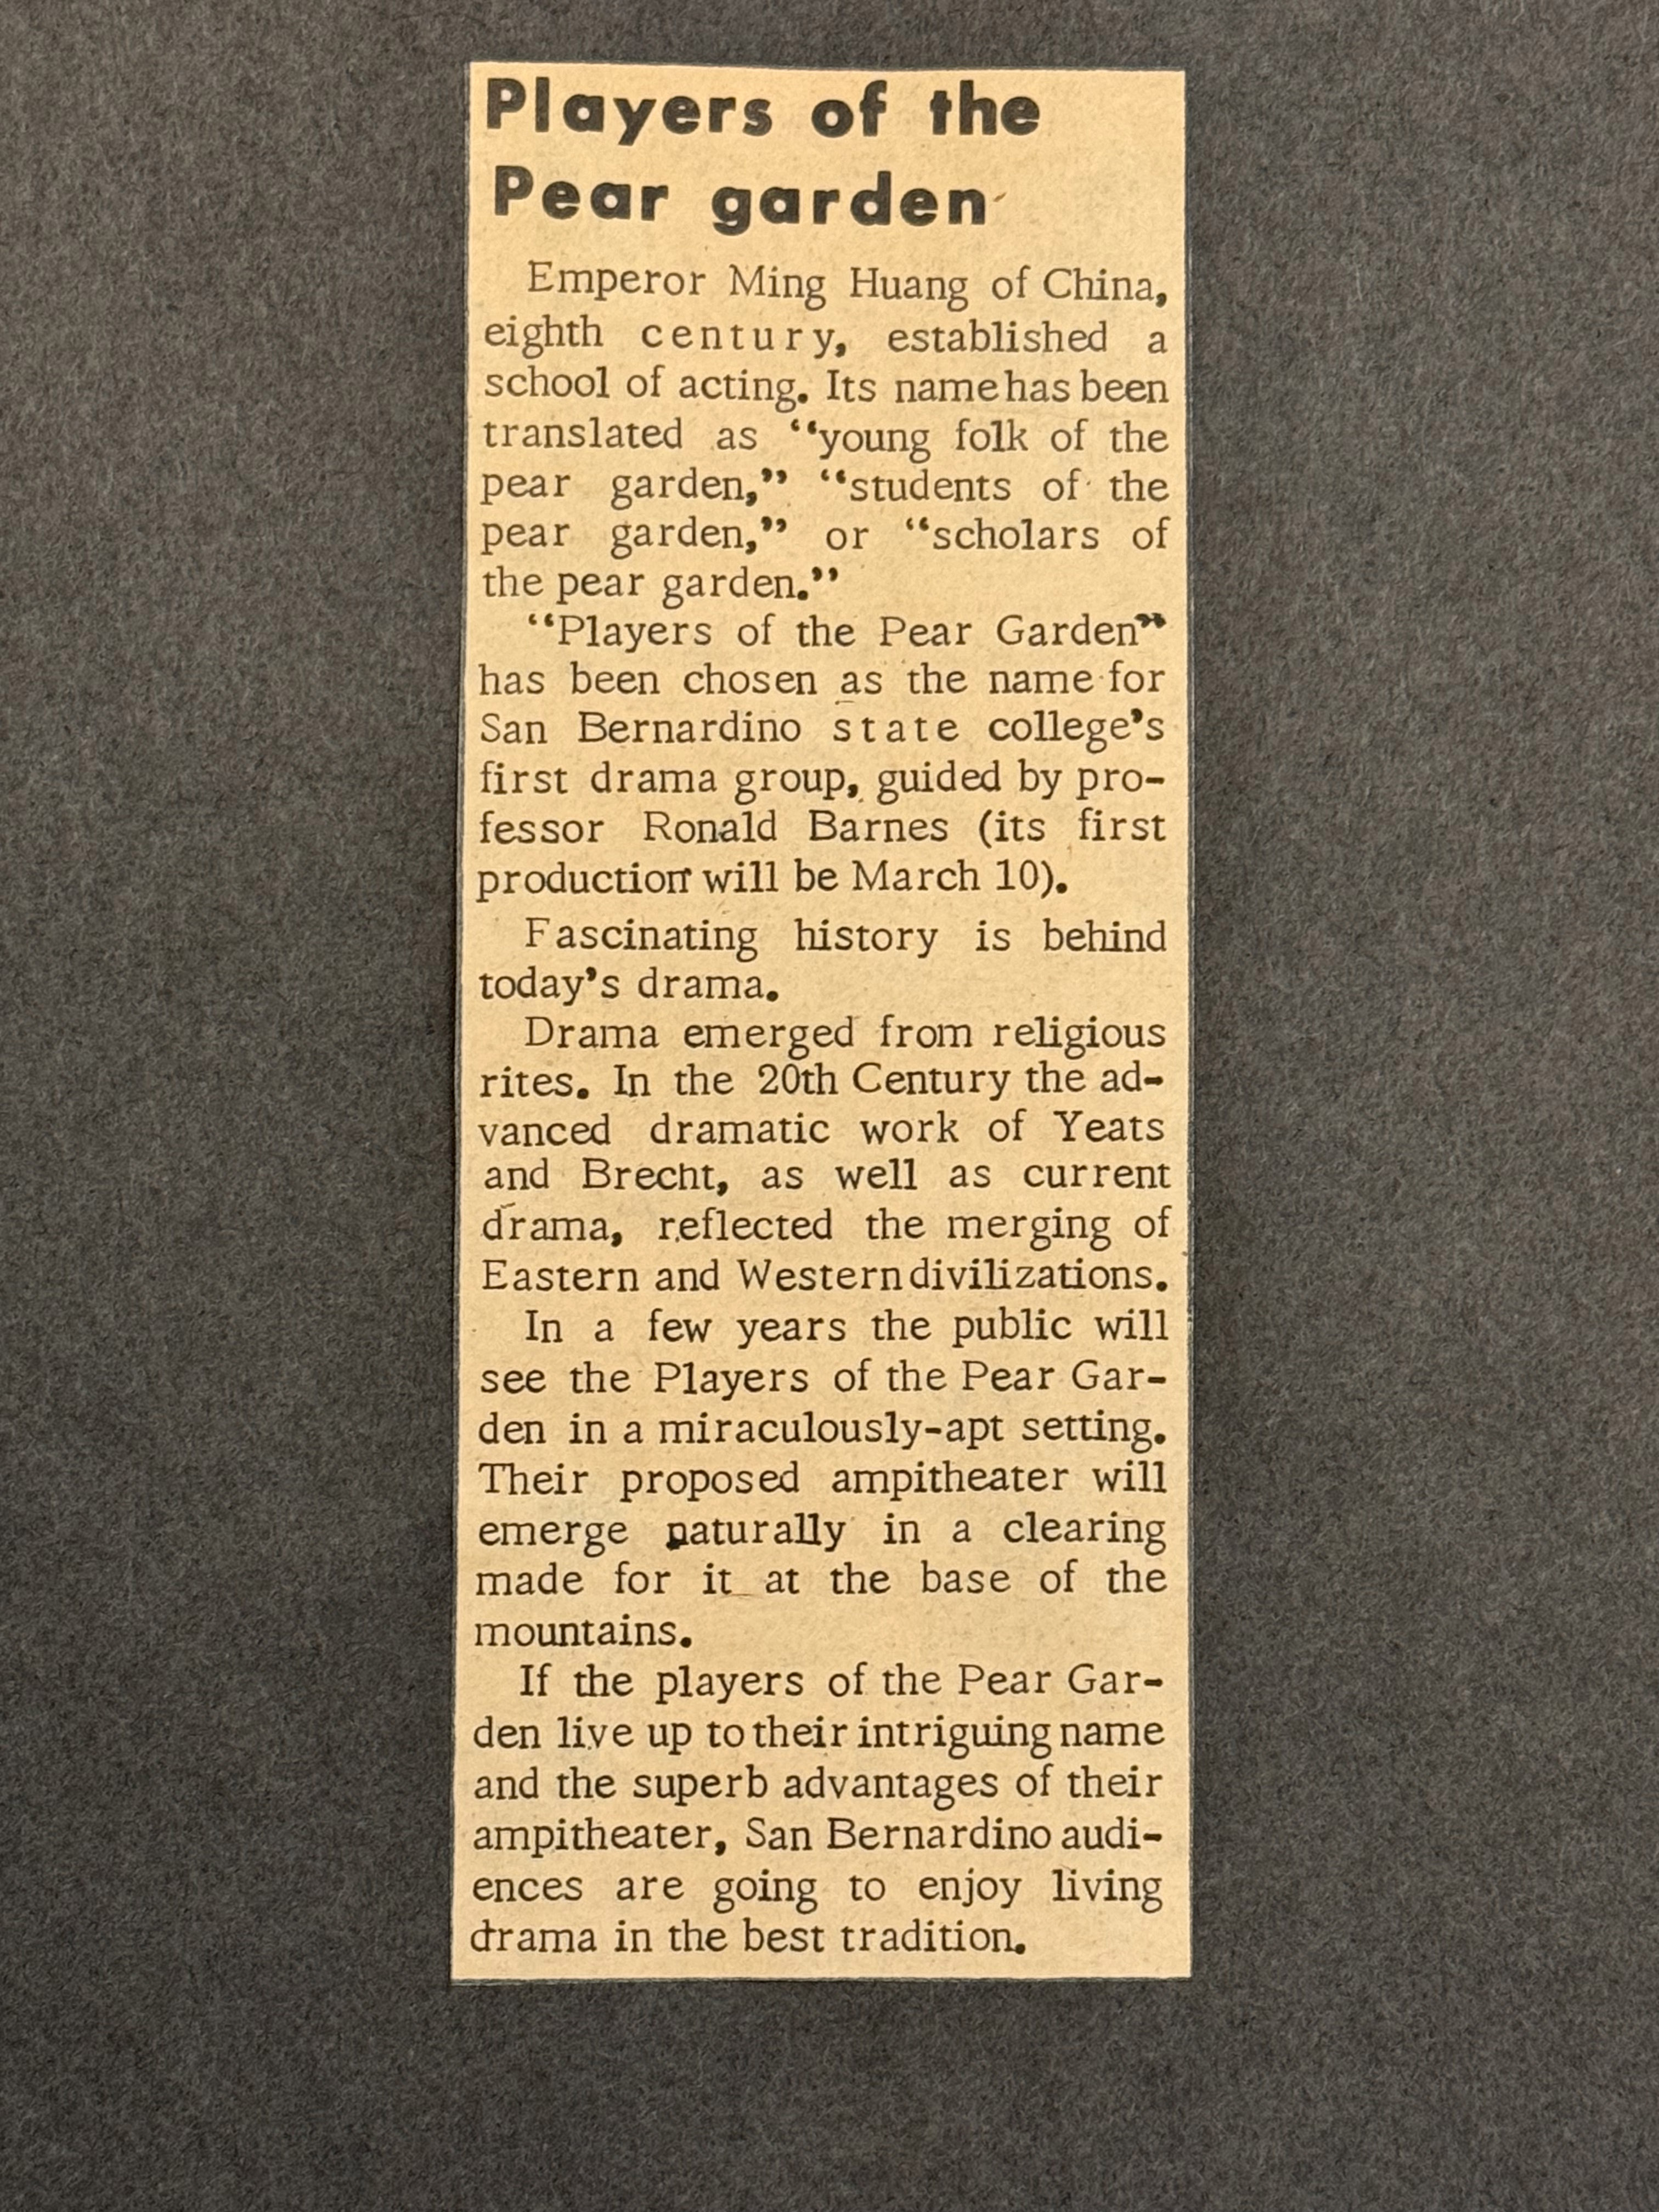 A newspaper clipping regarding the PPG from 1966